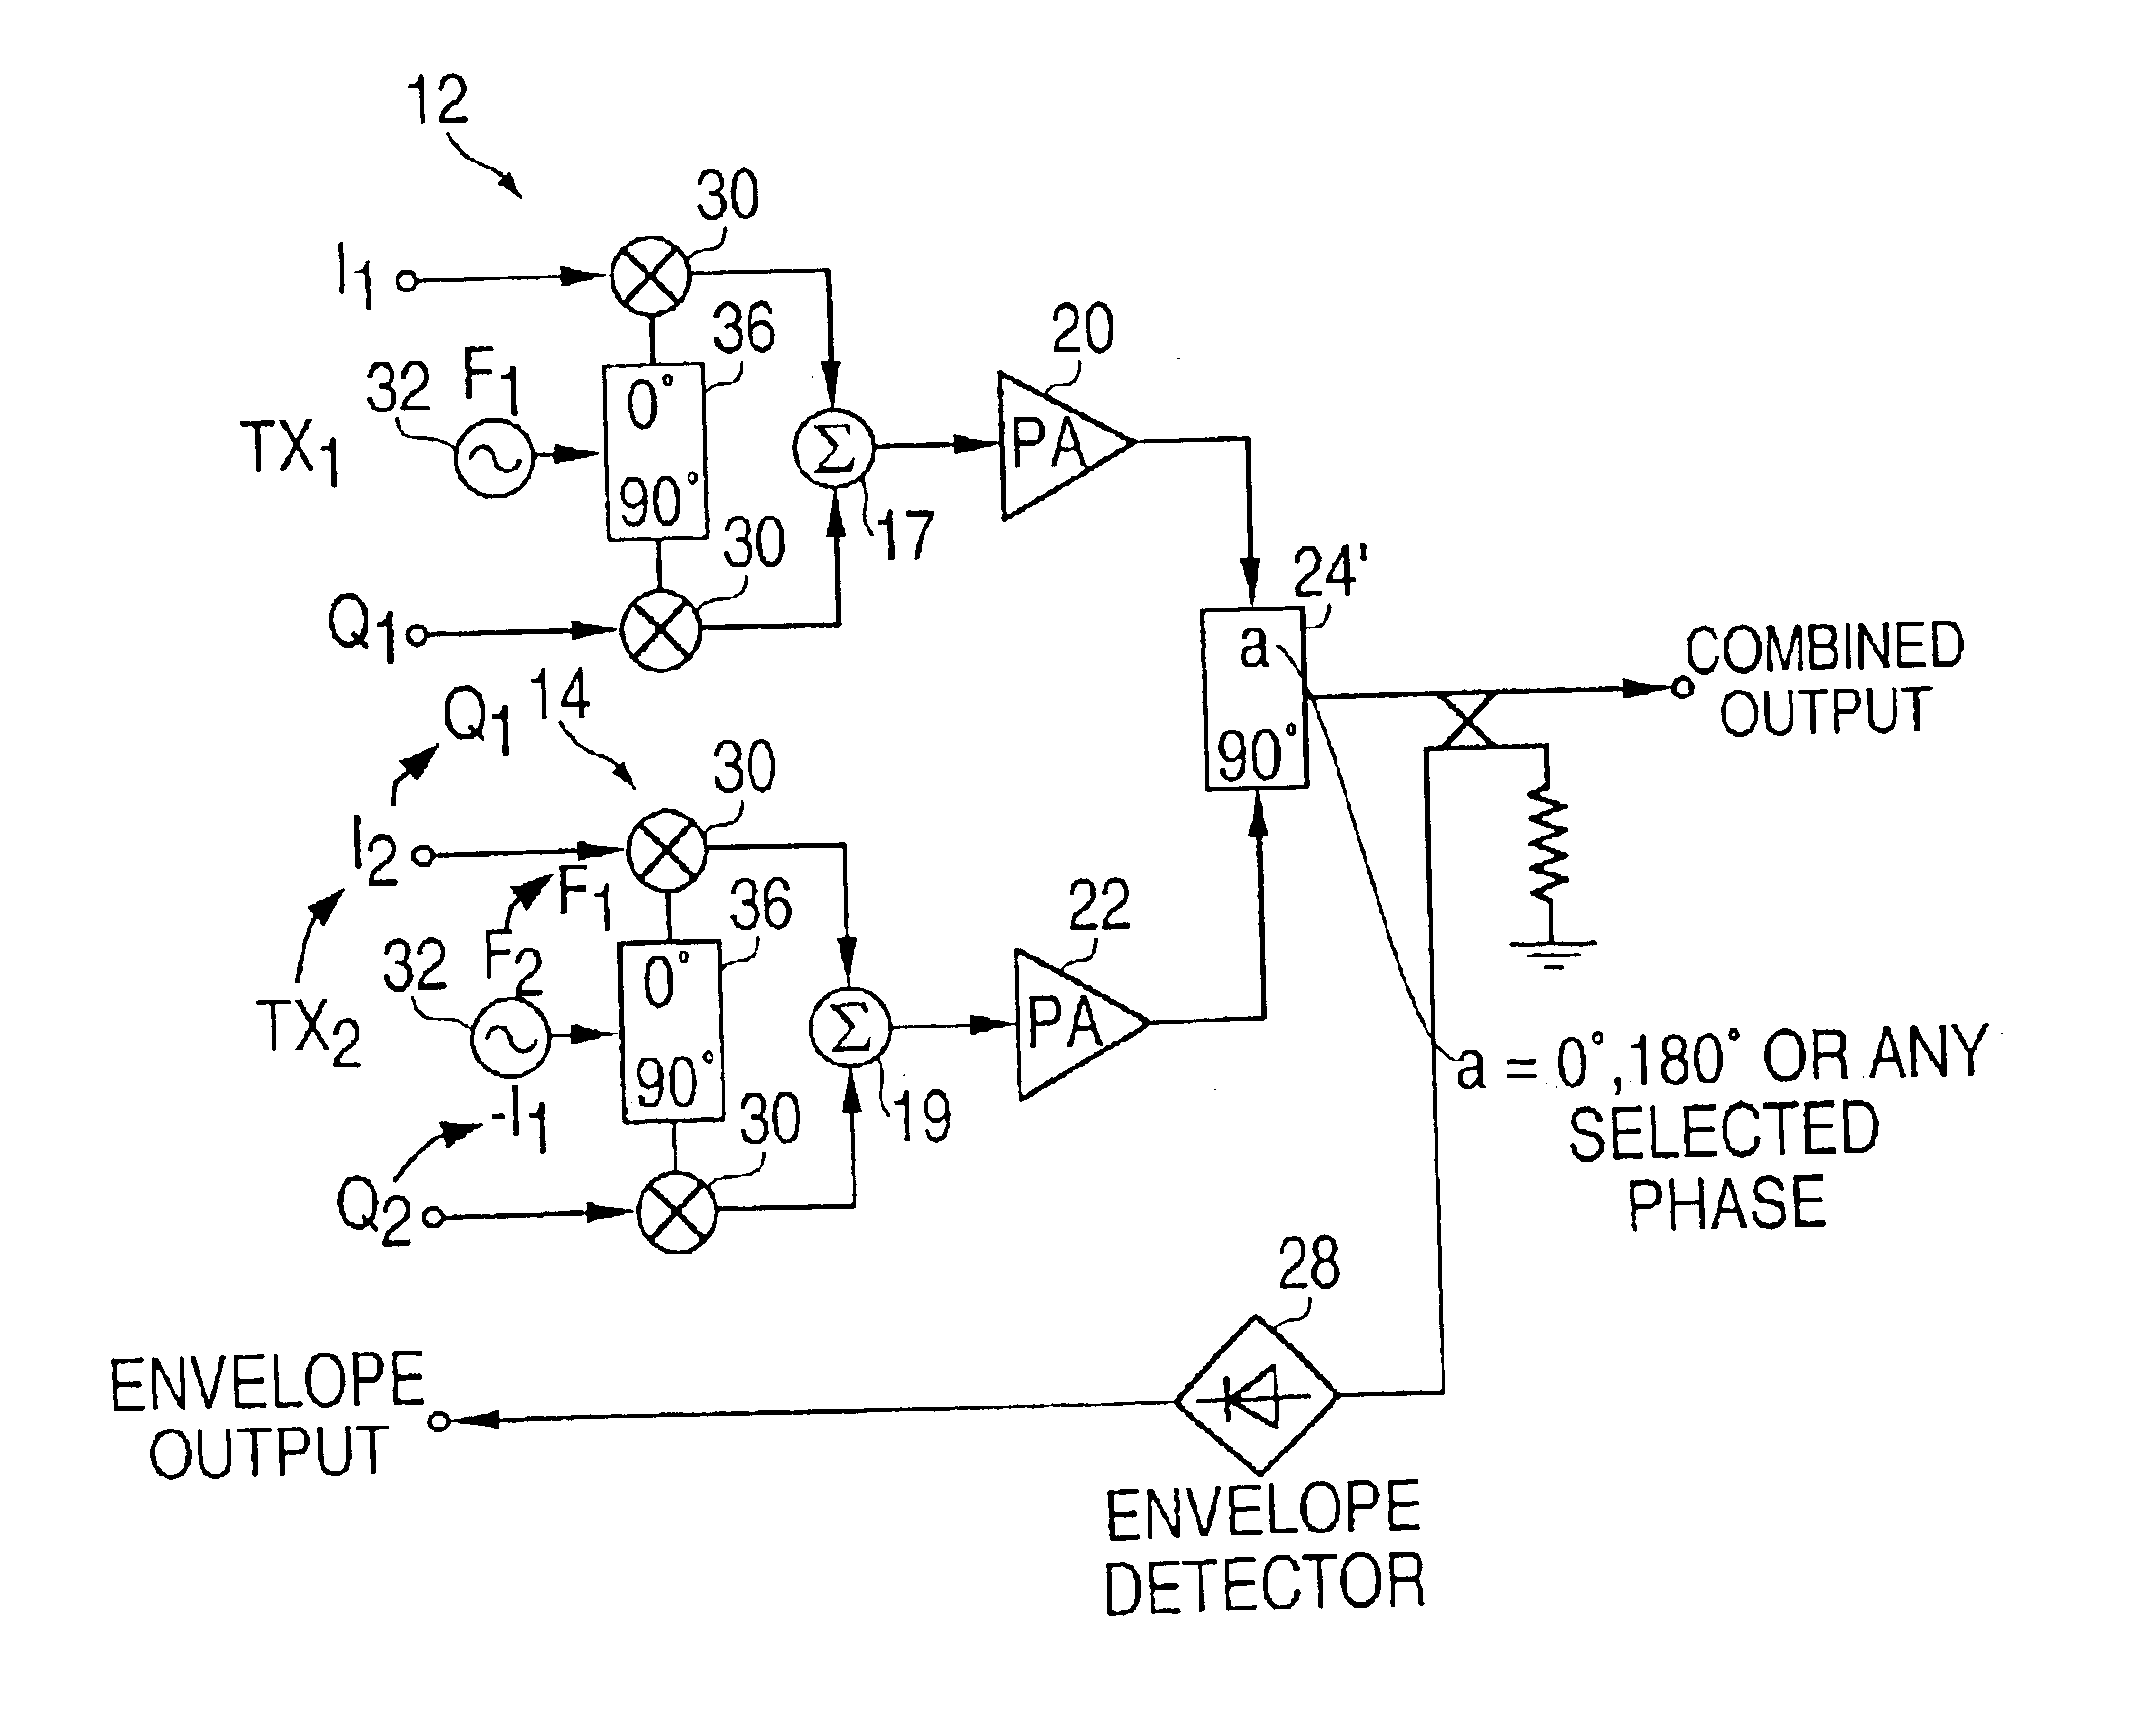 Switchless combining of multi-carrier coherent and incoherent carriers